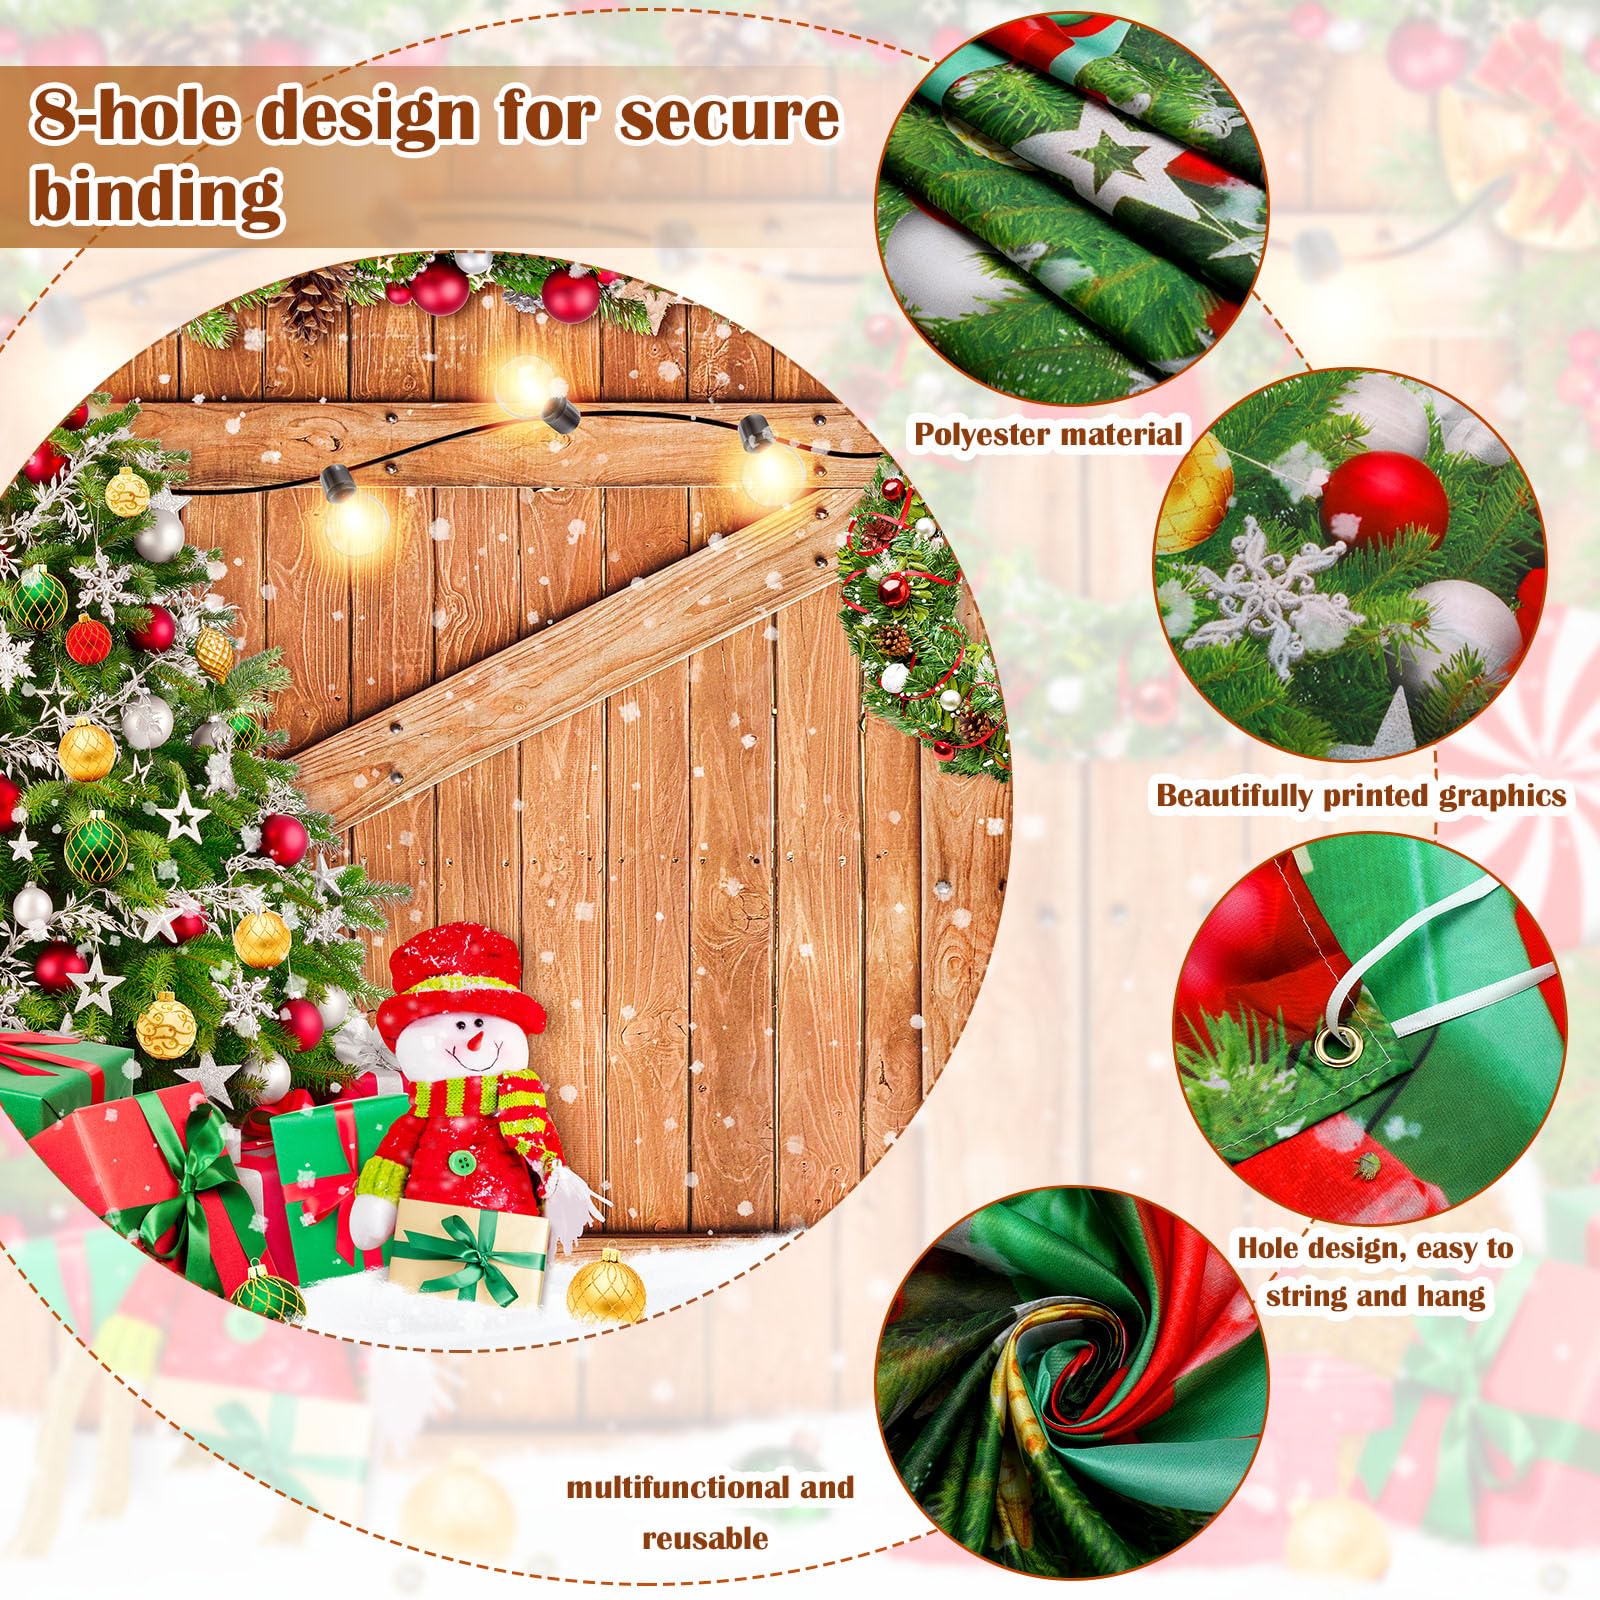 Christmas Garage Door Banner 6 x 13 ft Garage Door Christmas Decorations Large Christmas Backdrop Decoration Holiday Vinyl Cover Banner for Outdoor Indoor Home Nativity Xmas Wall Photo Background